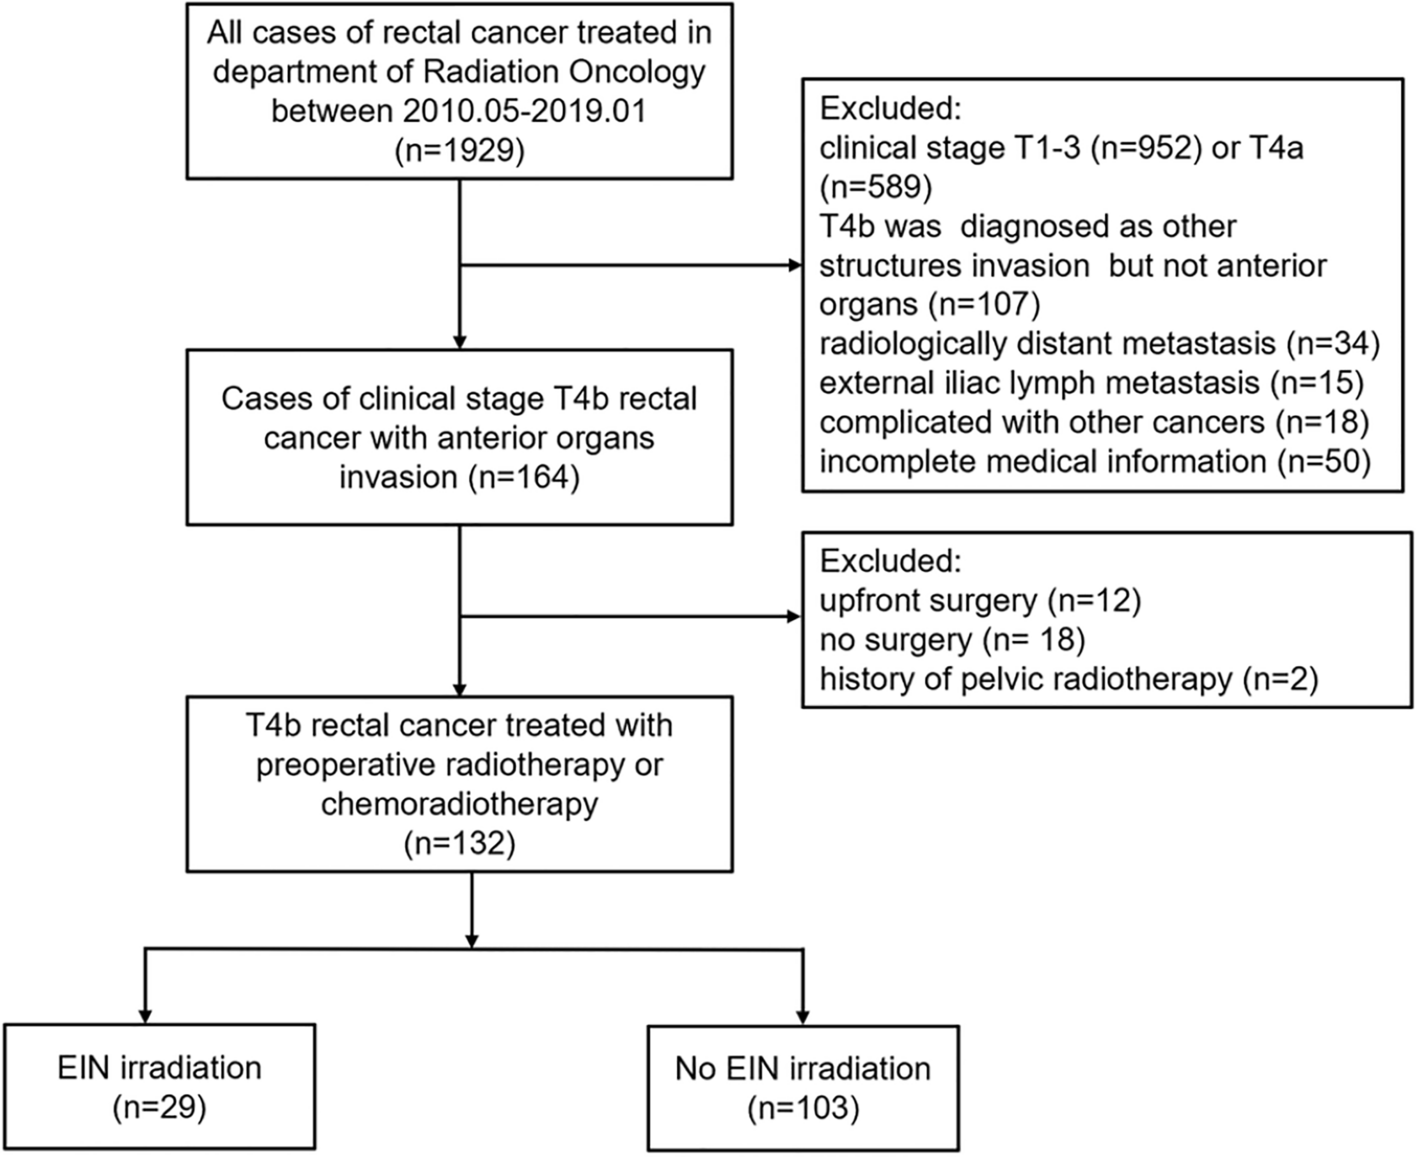 Excluding external iliac node irradiation during neoadjuvant radiotherapy decreases lower intestinal toxicity without compromising efficacy in T4b rectal cancer patients with tumours involving the anterior structures